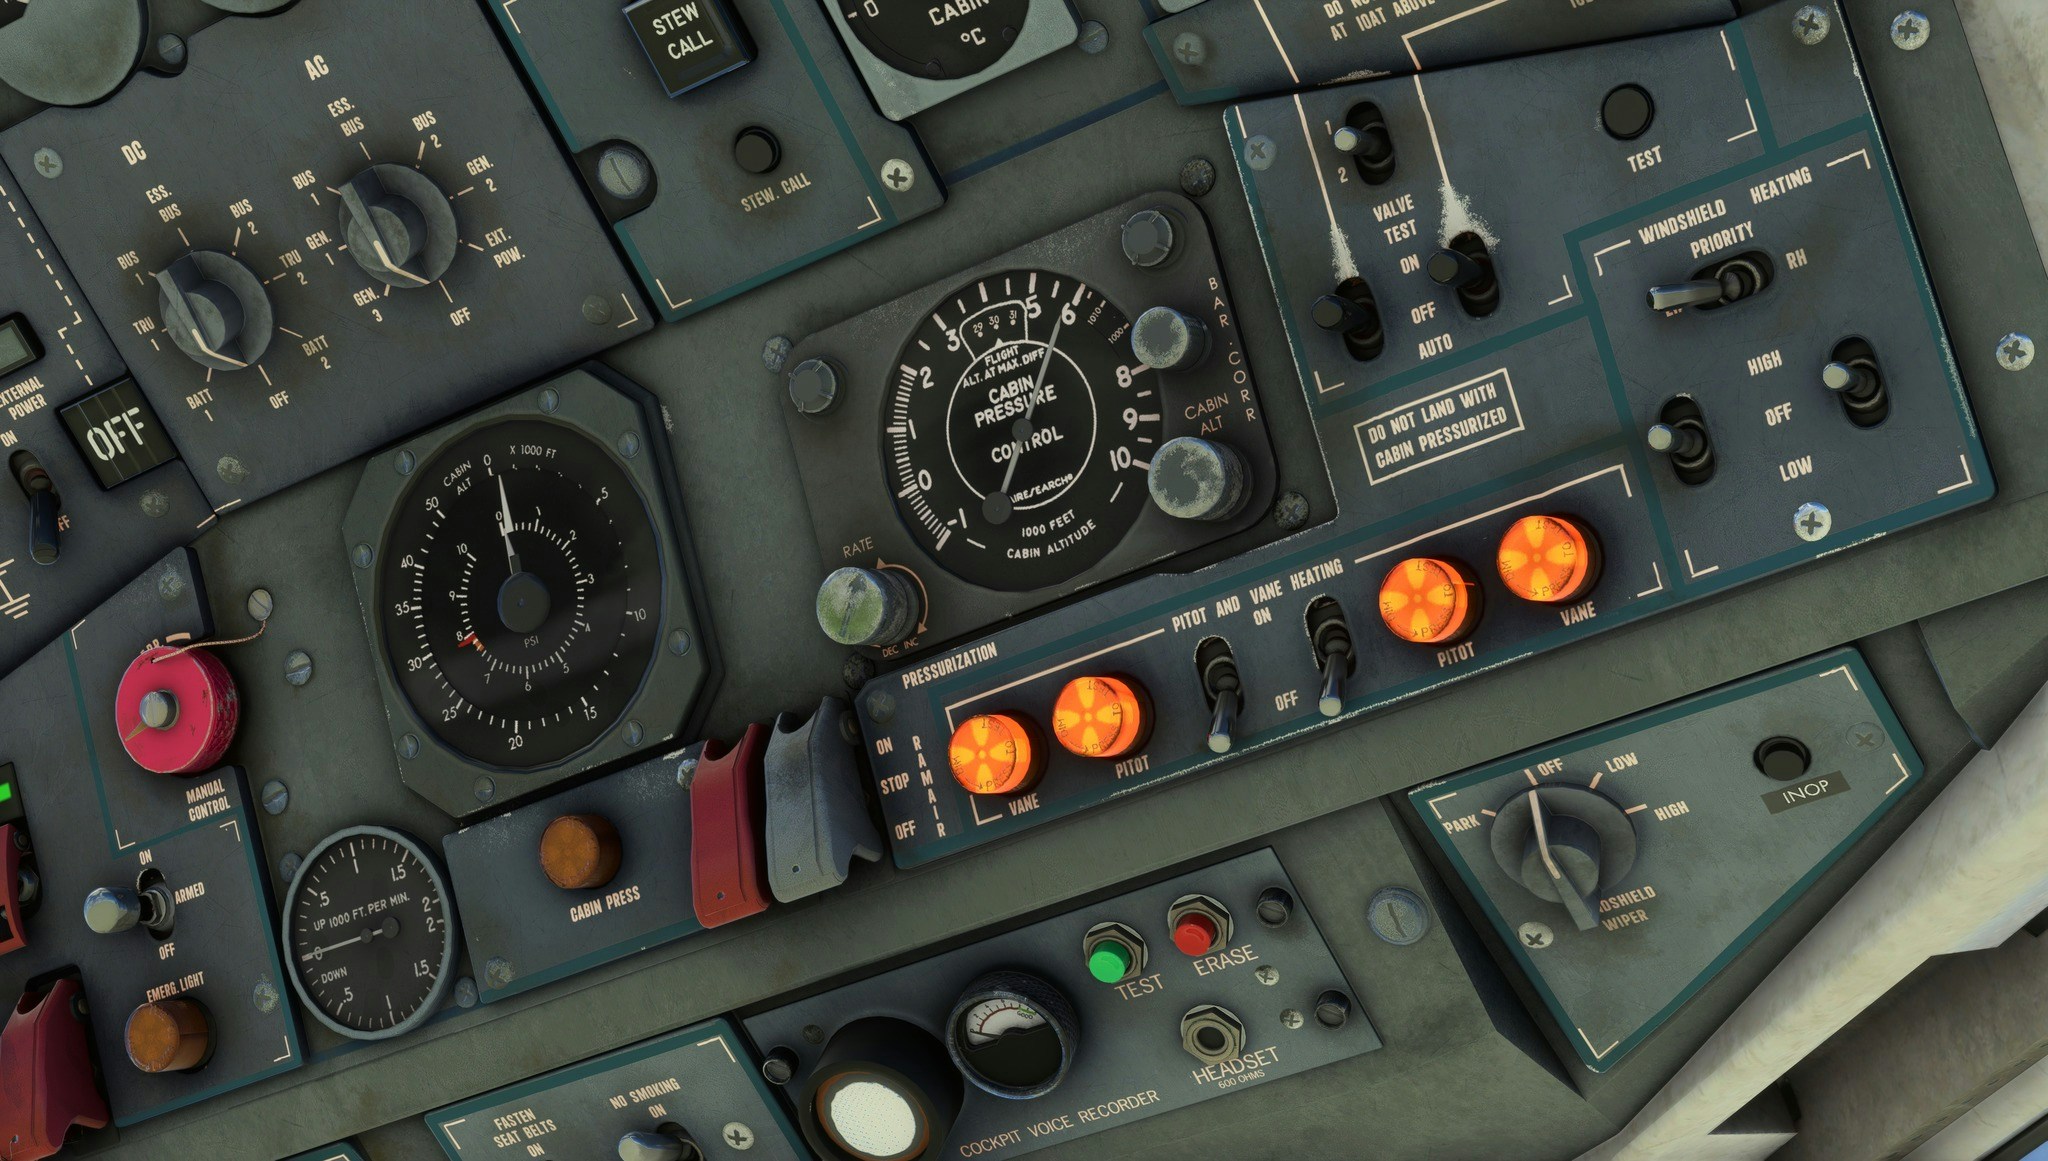 Just Flight Confirms Fokker F28 Professional Release Date and Pricing